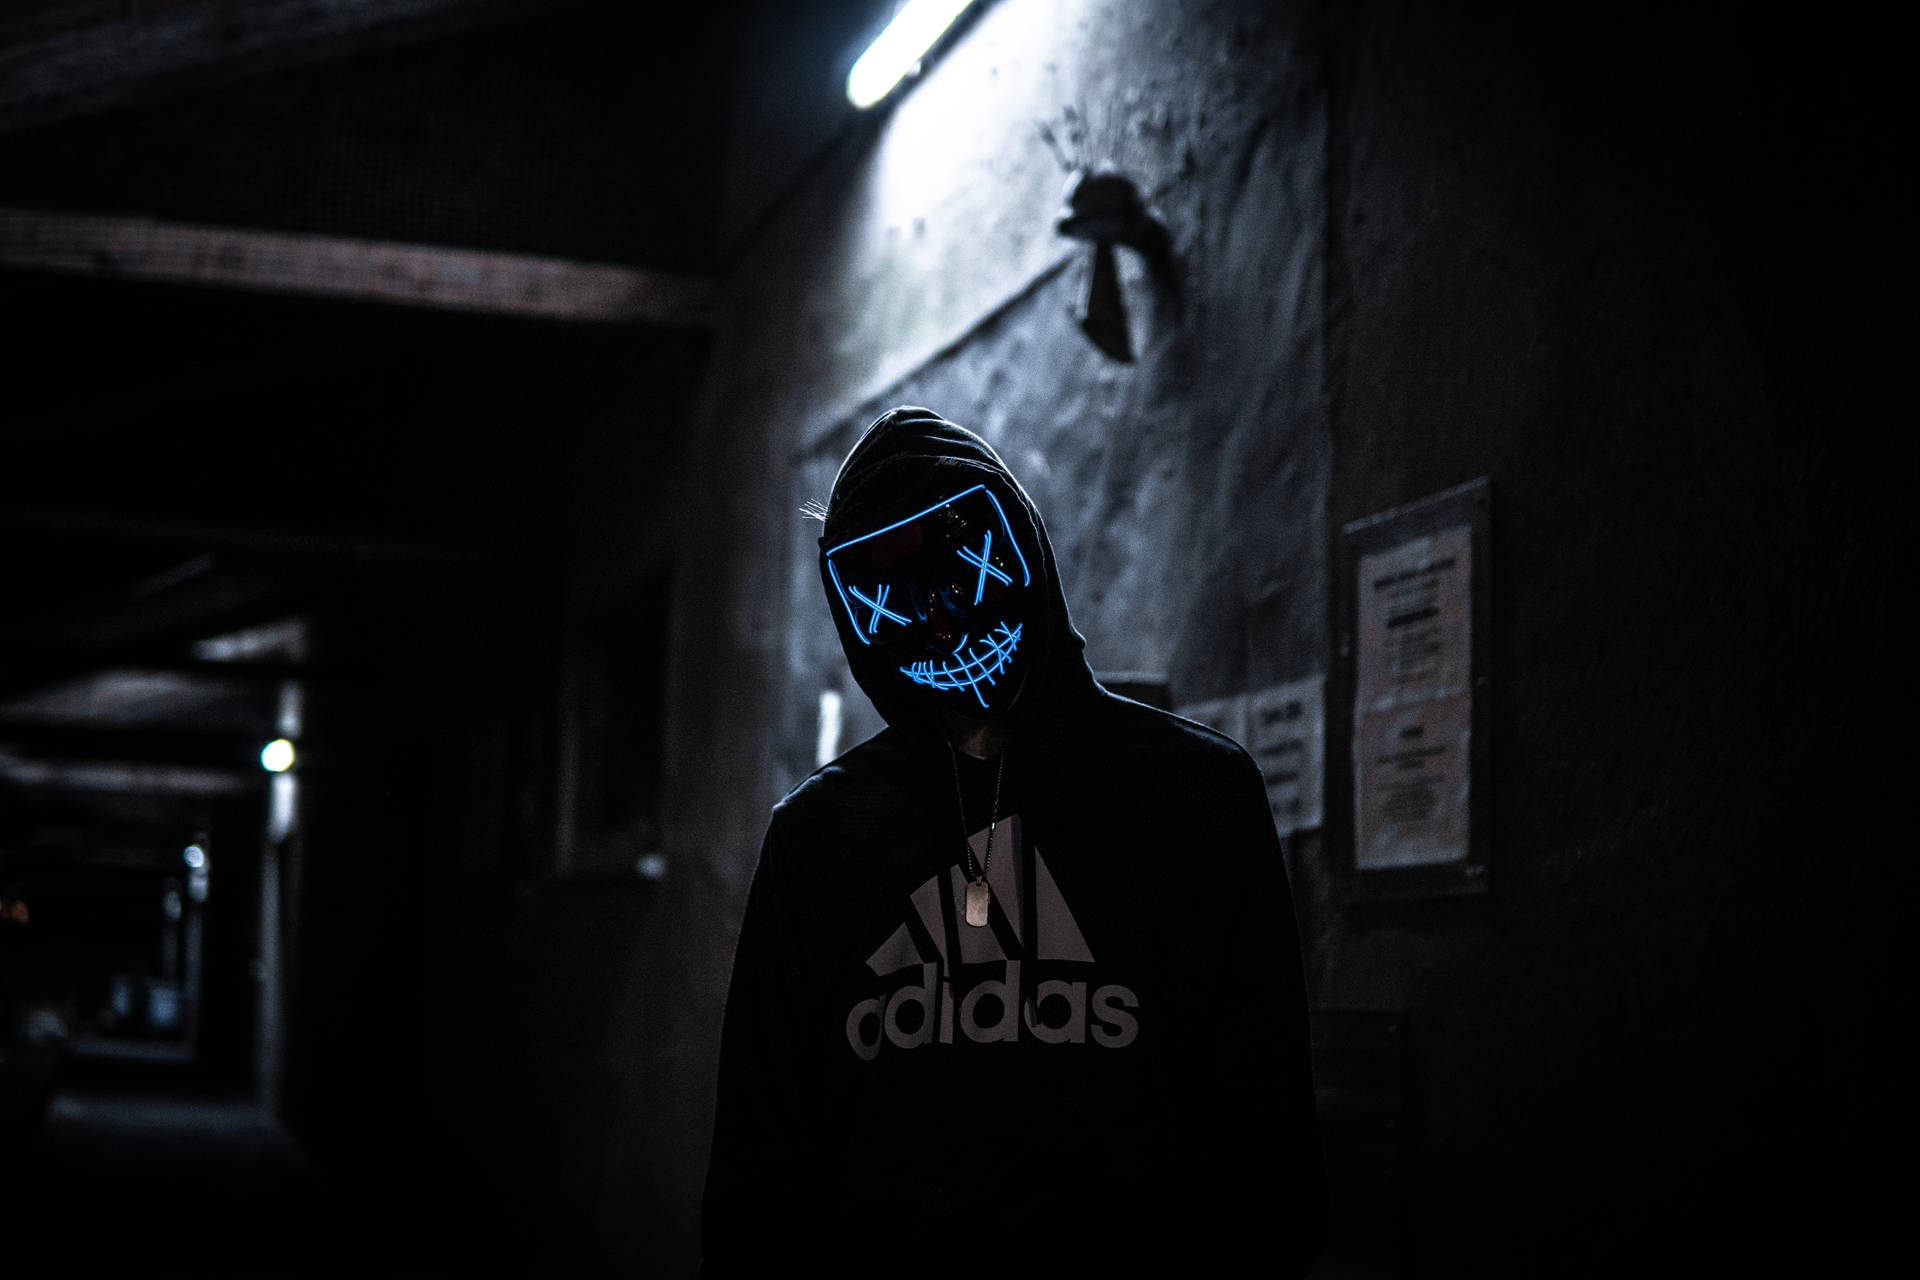 Admirer of The Purge in Adidas Hoodie Wallpaper